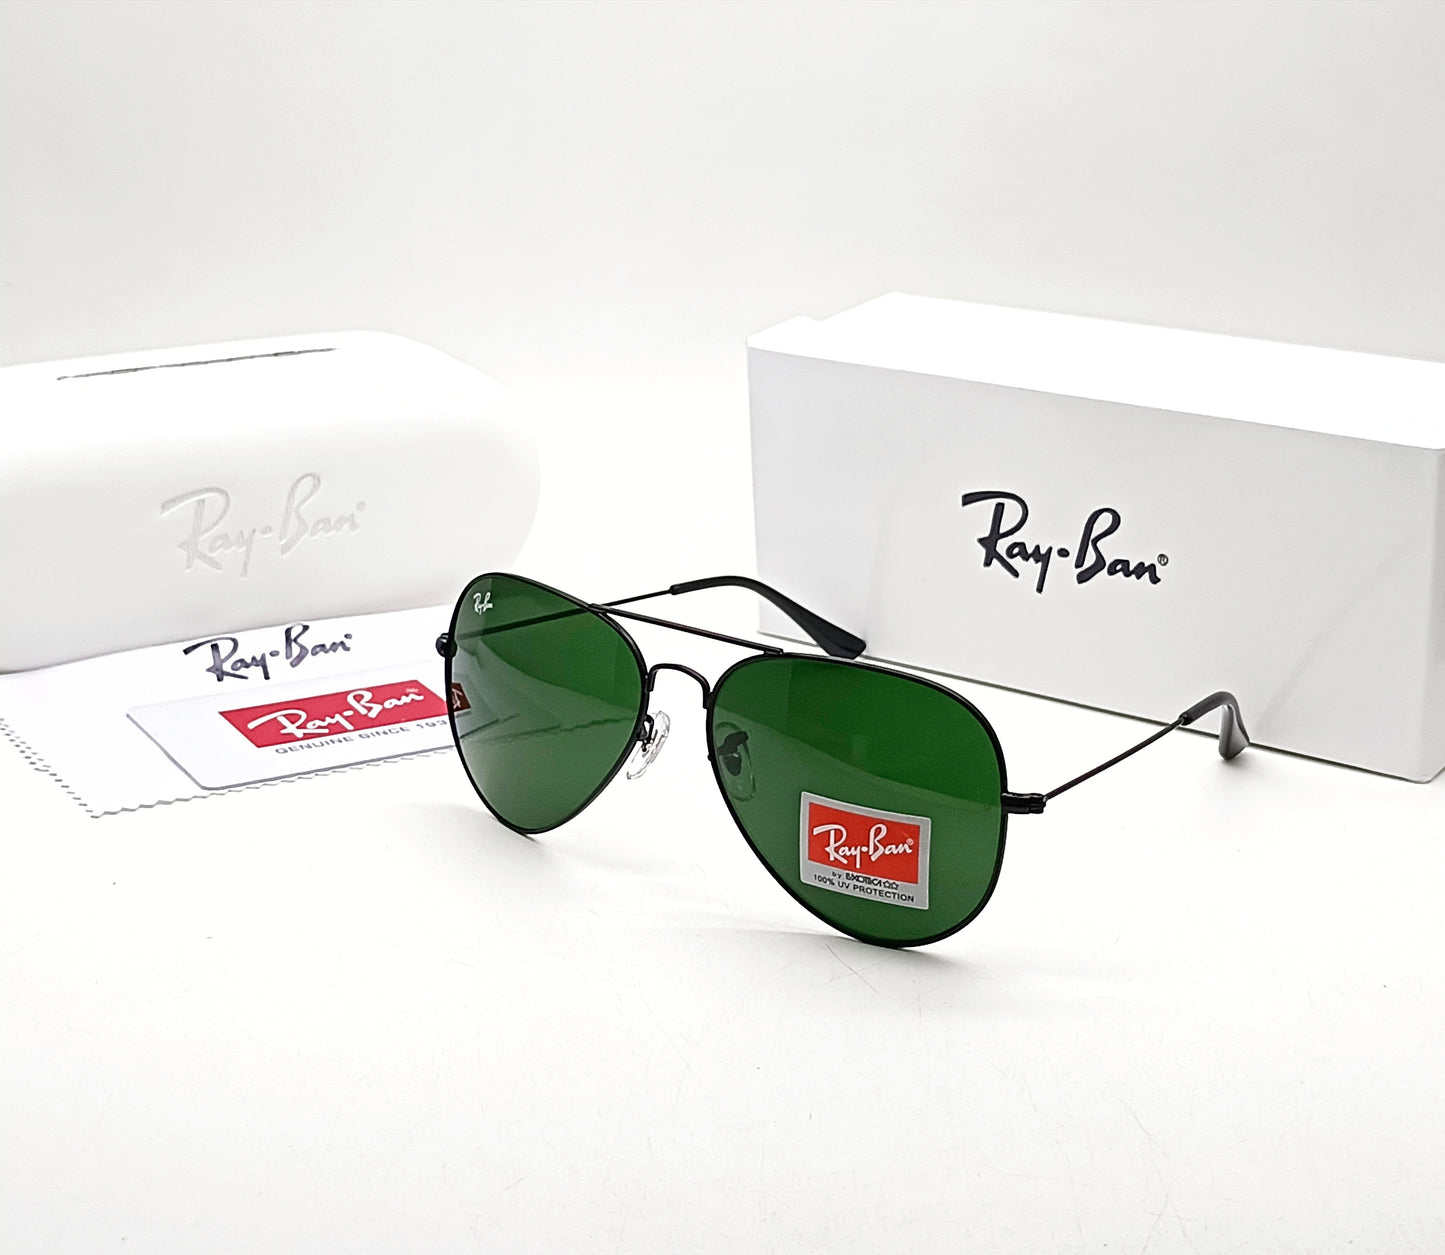 Green & Black 3026 Oval Aviator Metal Trendy Hot Favourite Wintage Sunglass For Unisex.